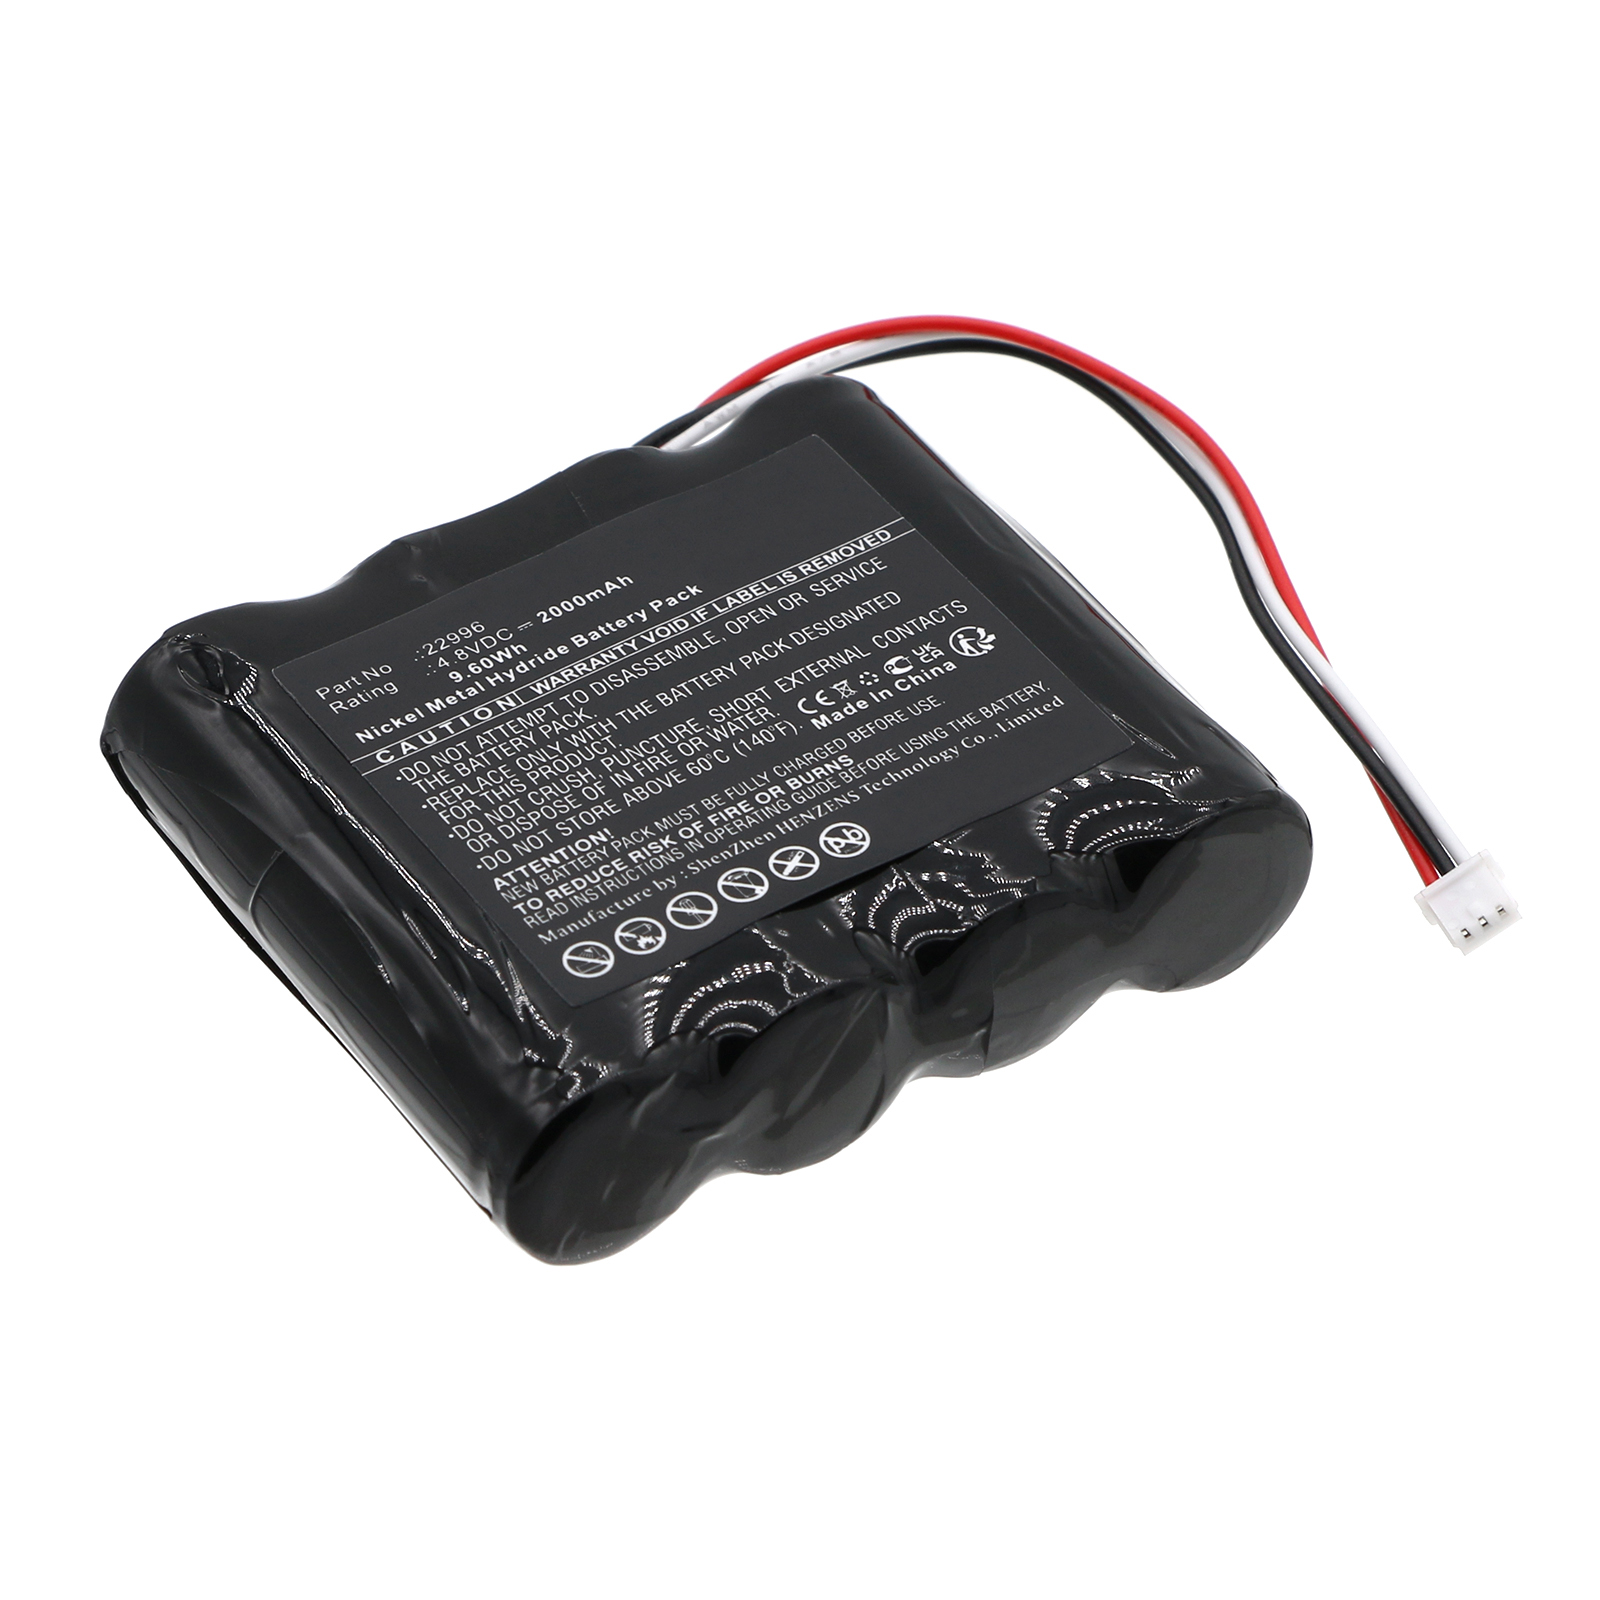 Synergy Digital Equipment Battery, Compatible with Systronik 22996 Equipment Battery (Ni-MH, 4.8V, 2000mAh)